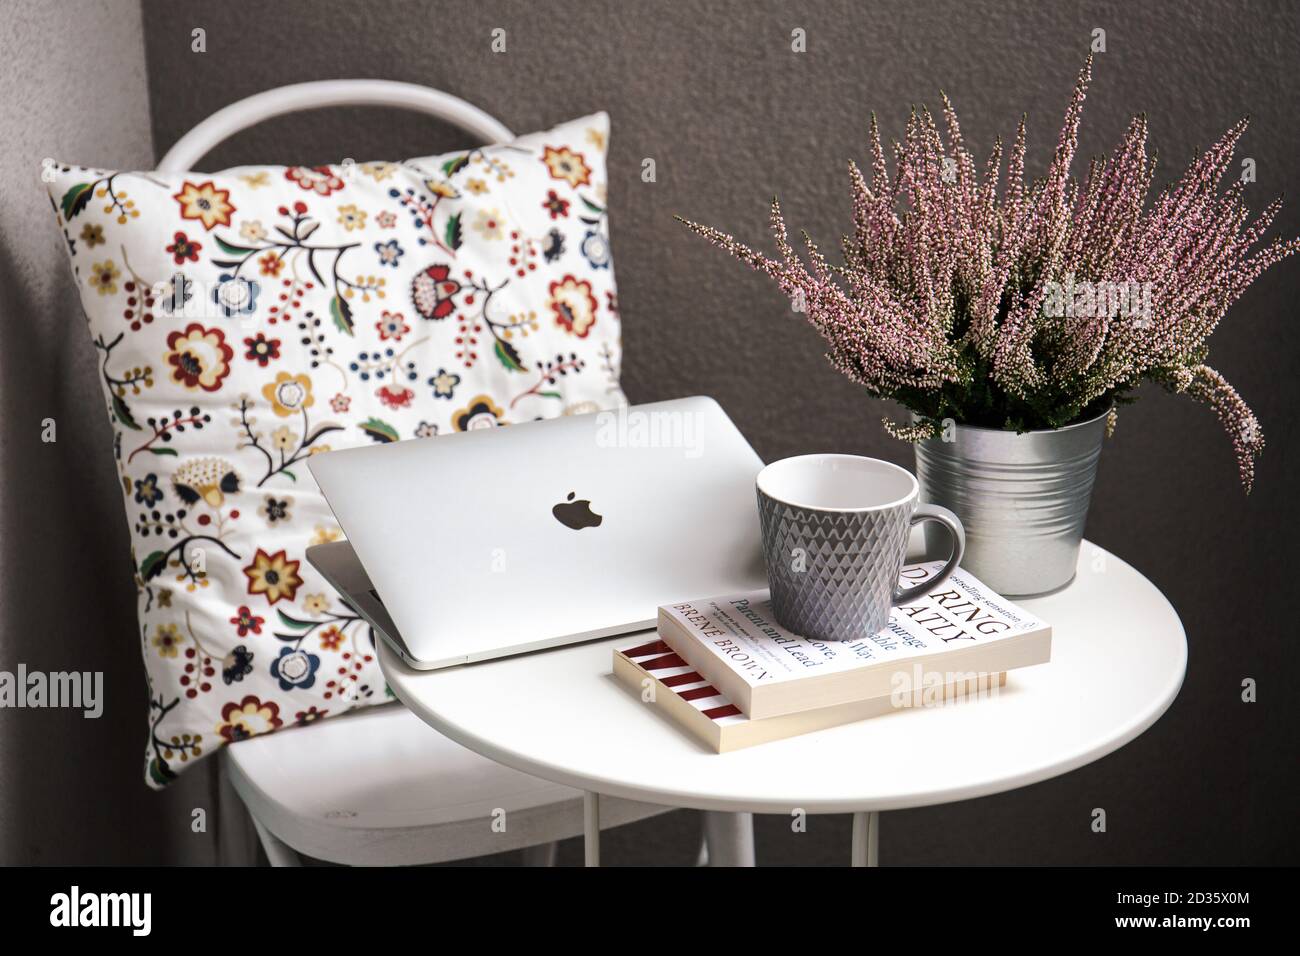 ORADEA, ROMANIA - Sep 20, 2017: A Macbook sat on a table next to a cup of  coffee, a stack of books and a flower pot Stock Photo - Alamy